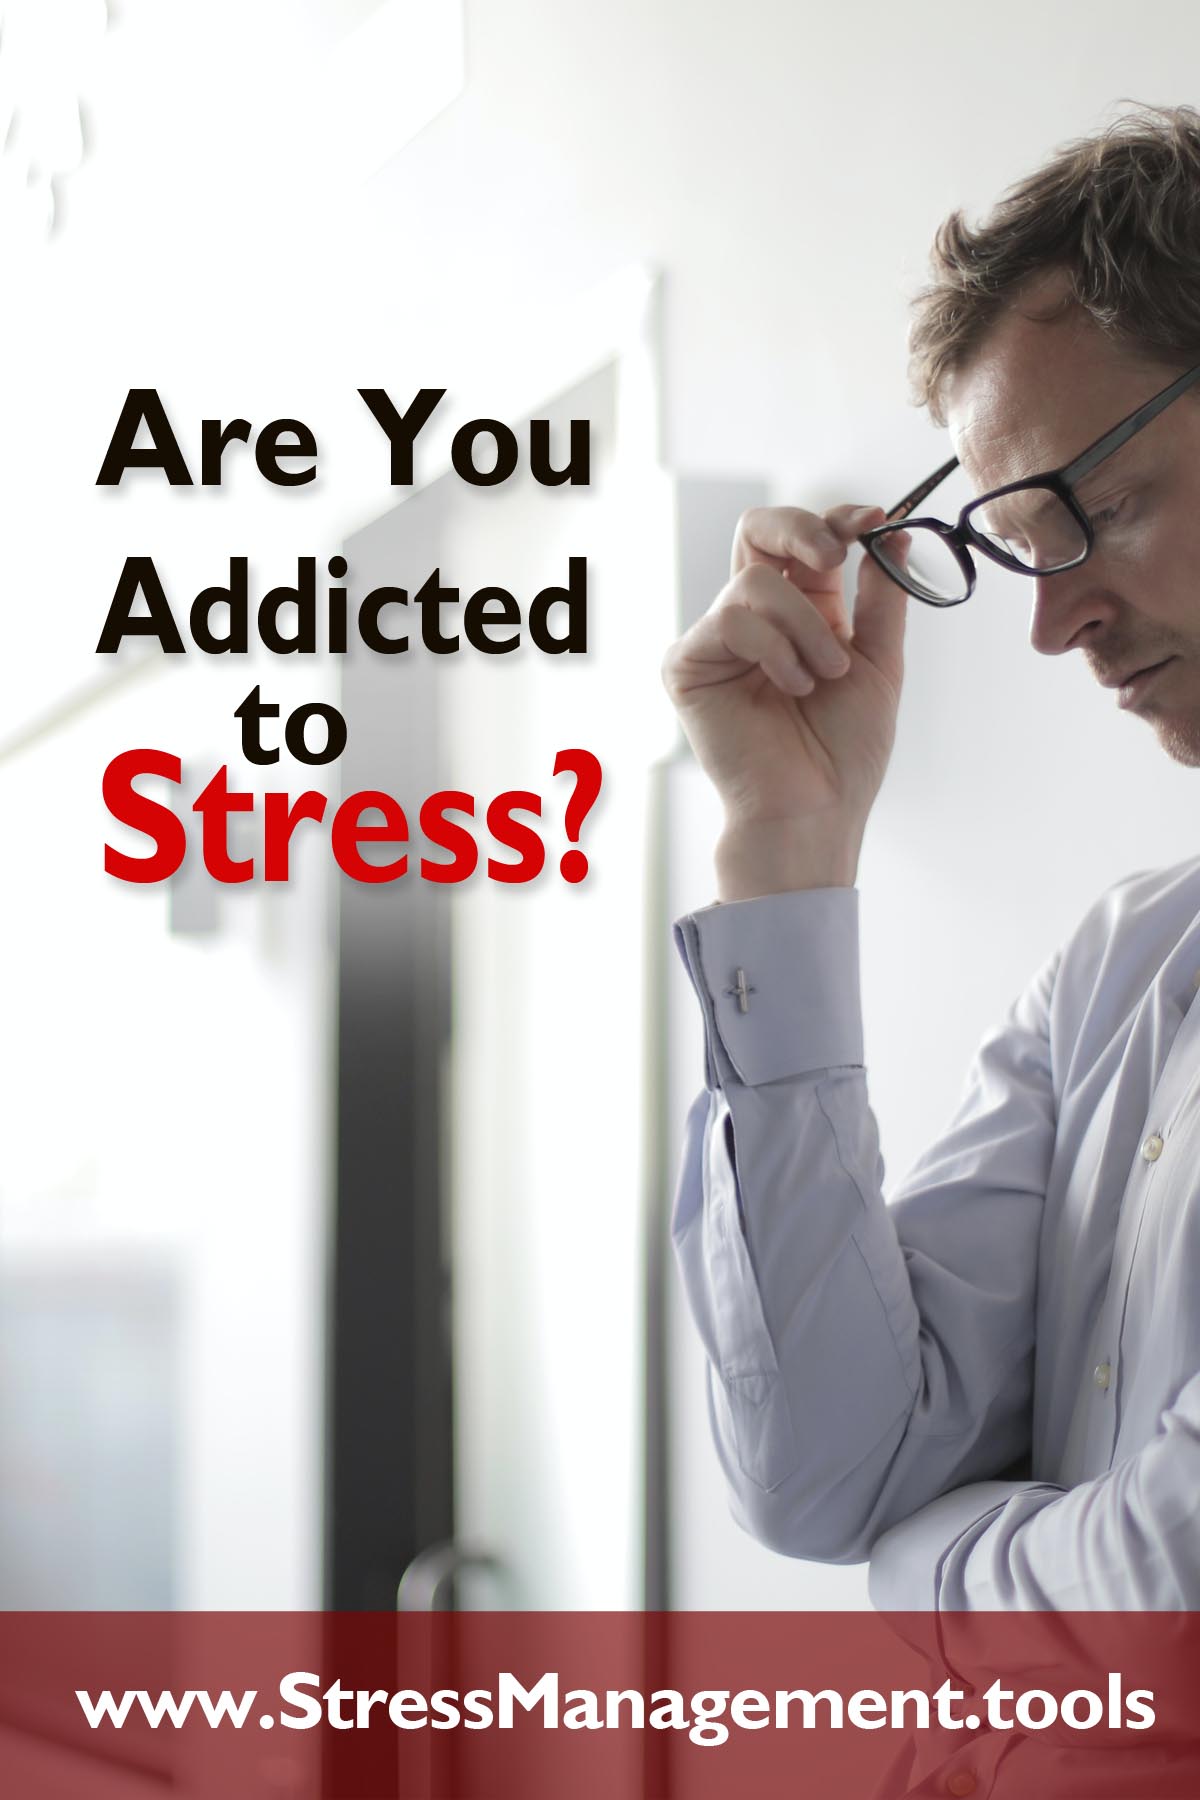 Are You Addicted to Stress?